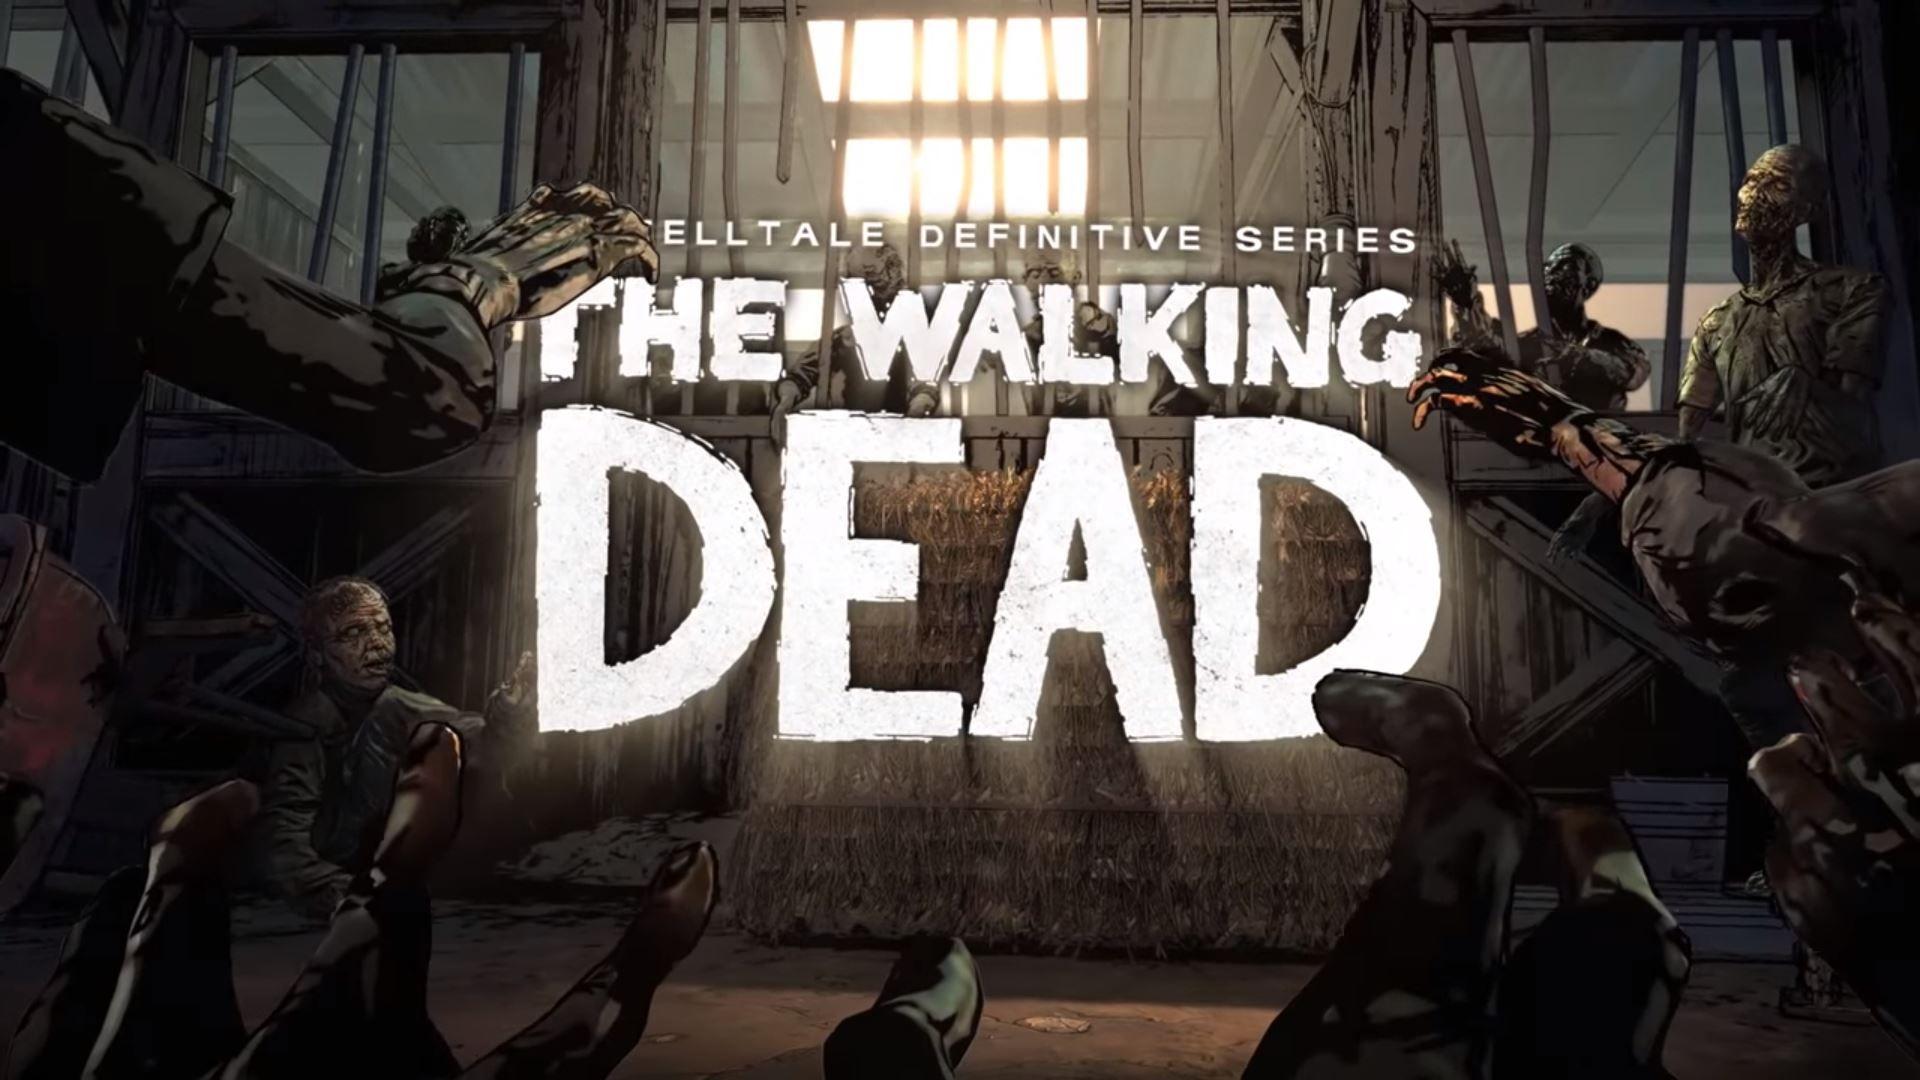 The Walking Dead: The Telltale Definitive Series Announced. Gaming